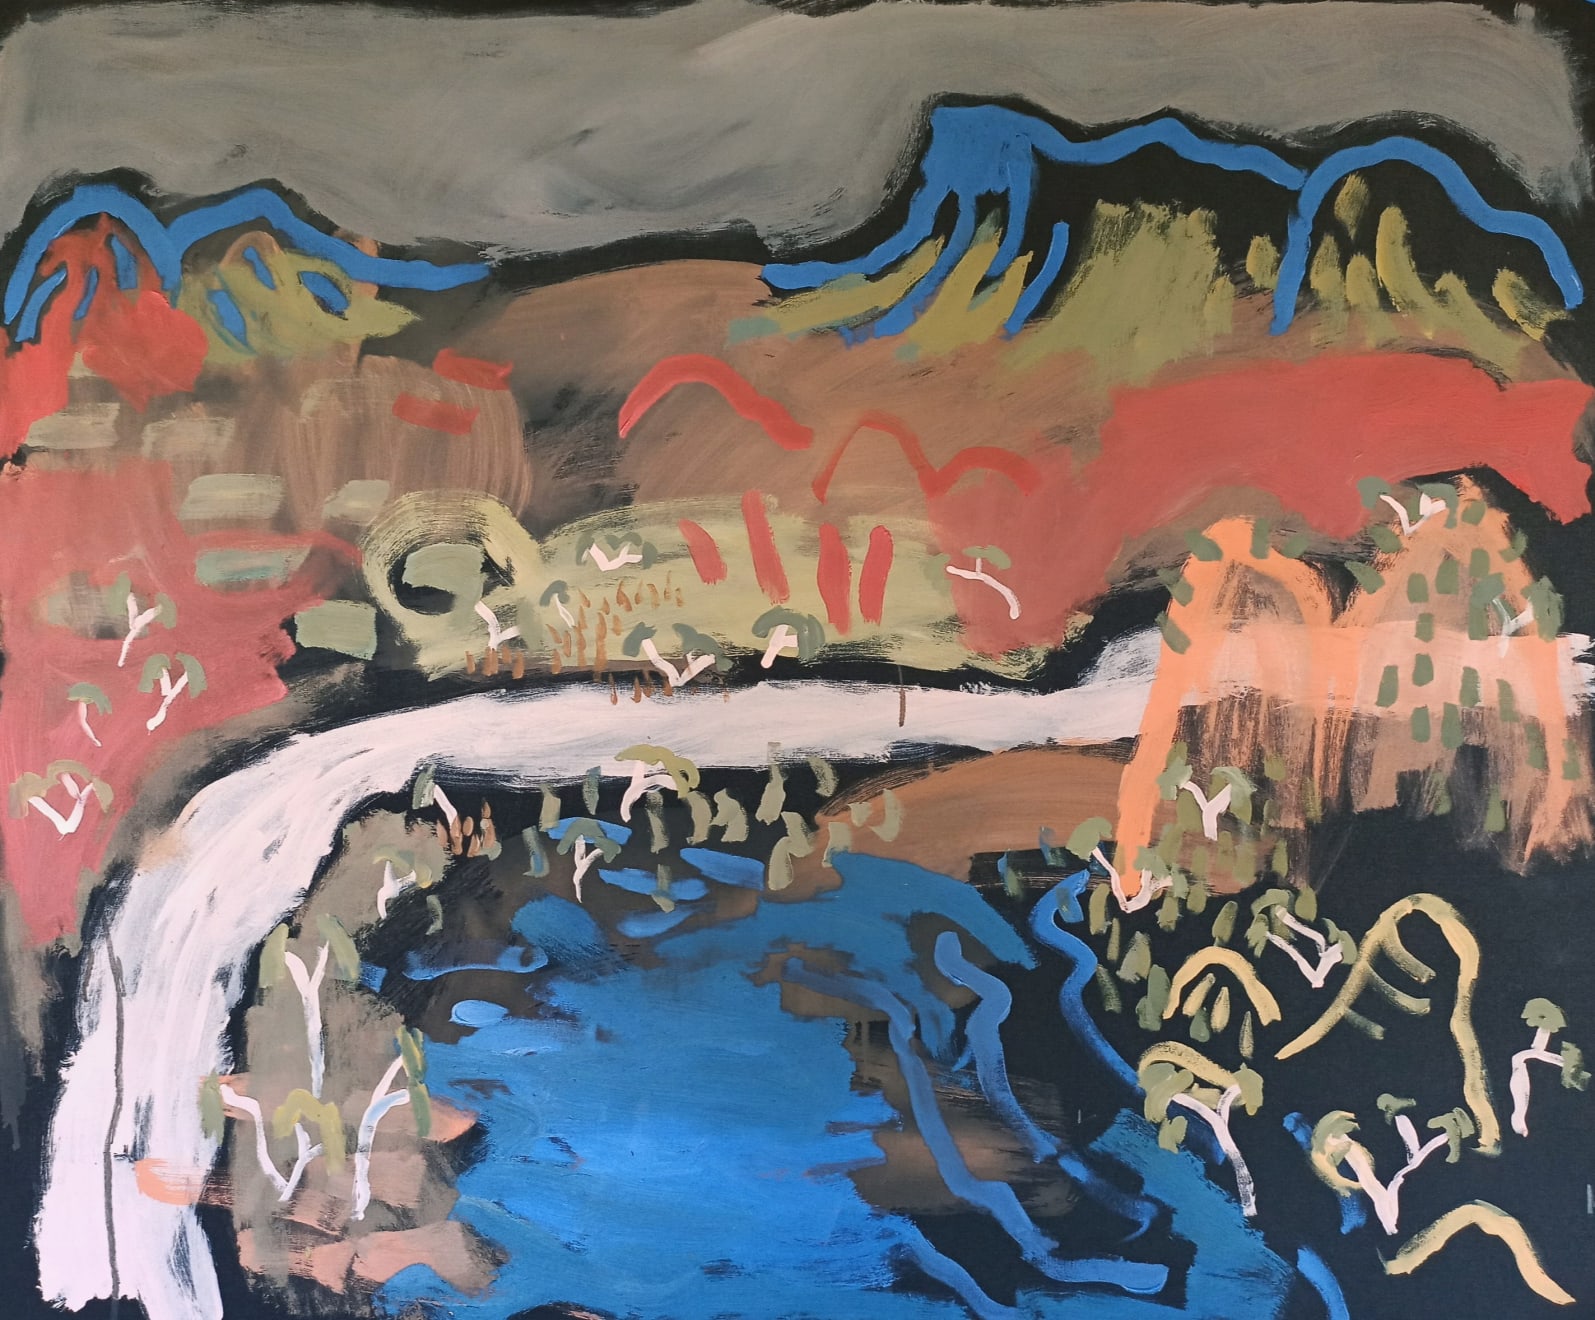 WATER IN birthday waterhole - west macdonnell ranges Acrylic on Canvas Original 110 x 90 cm AUD $2200 GBP £1115 SOLD